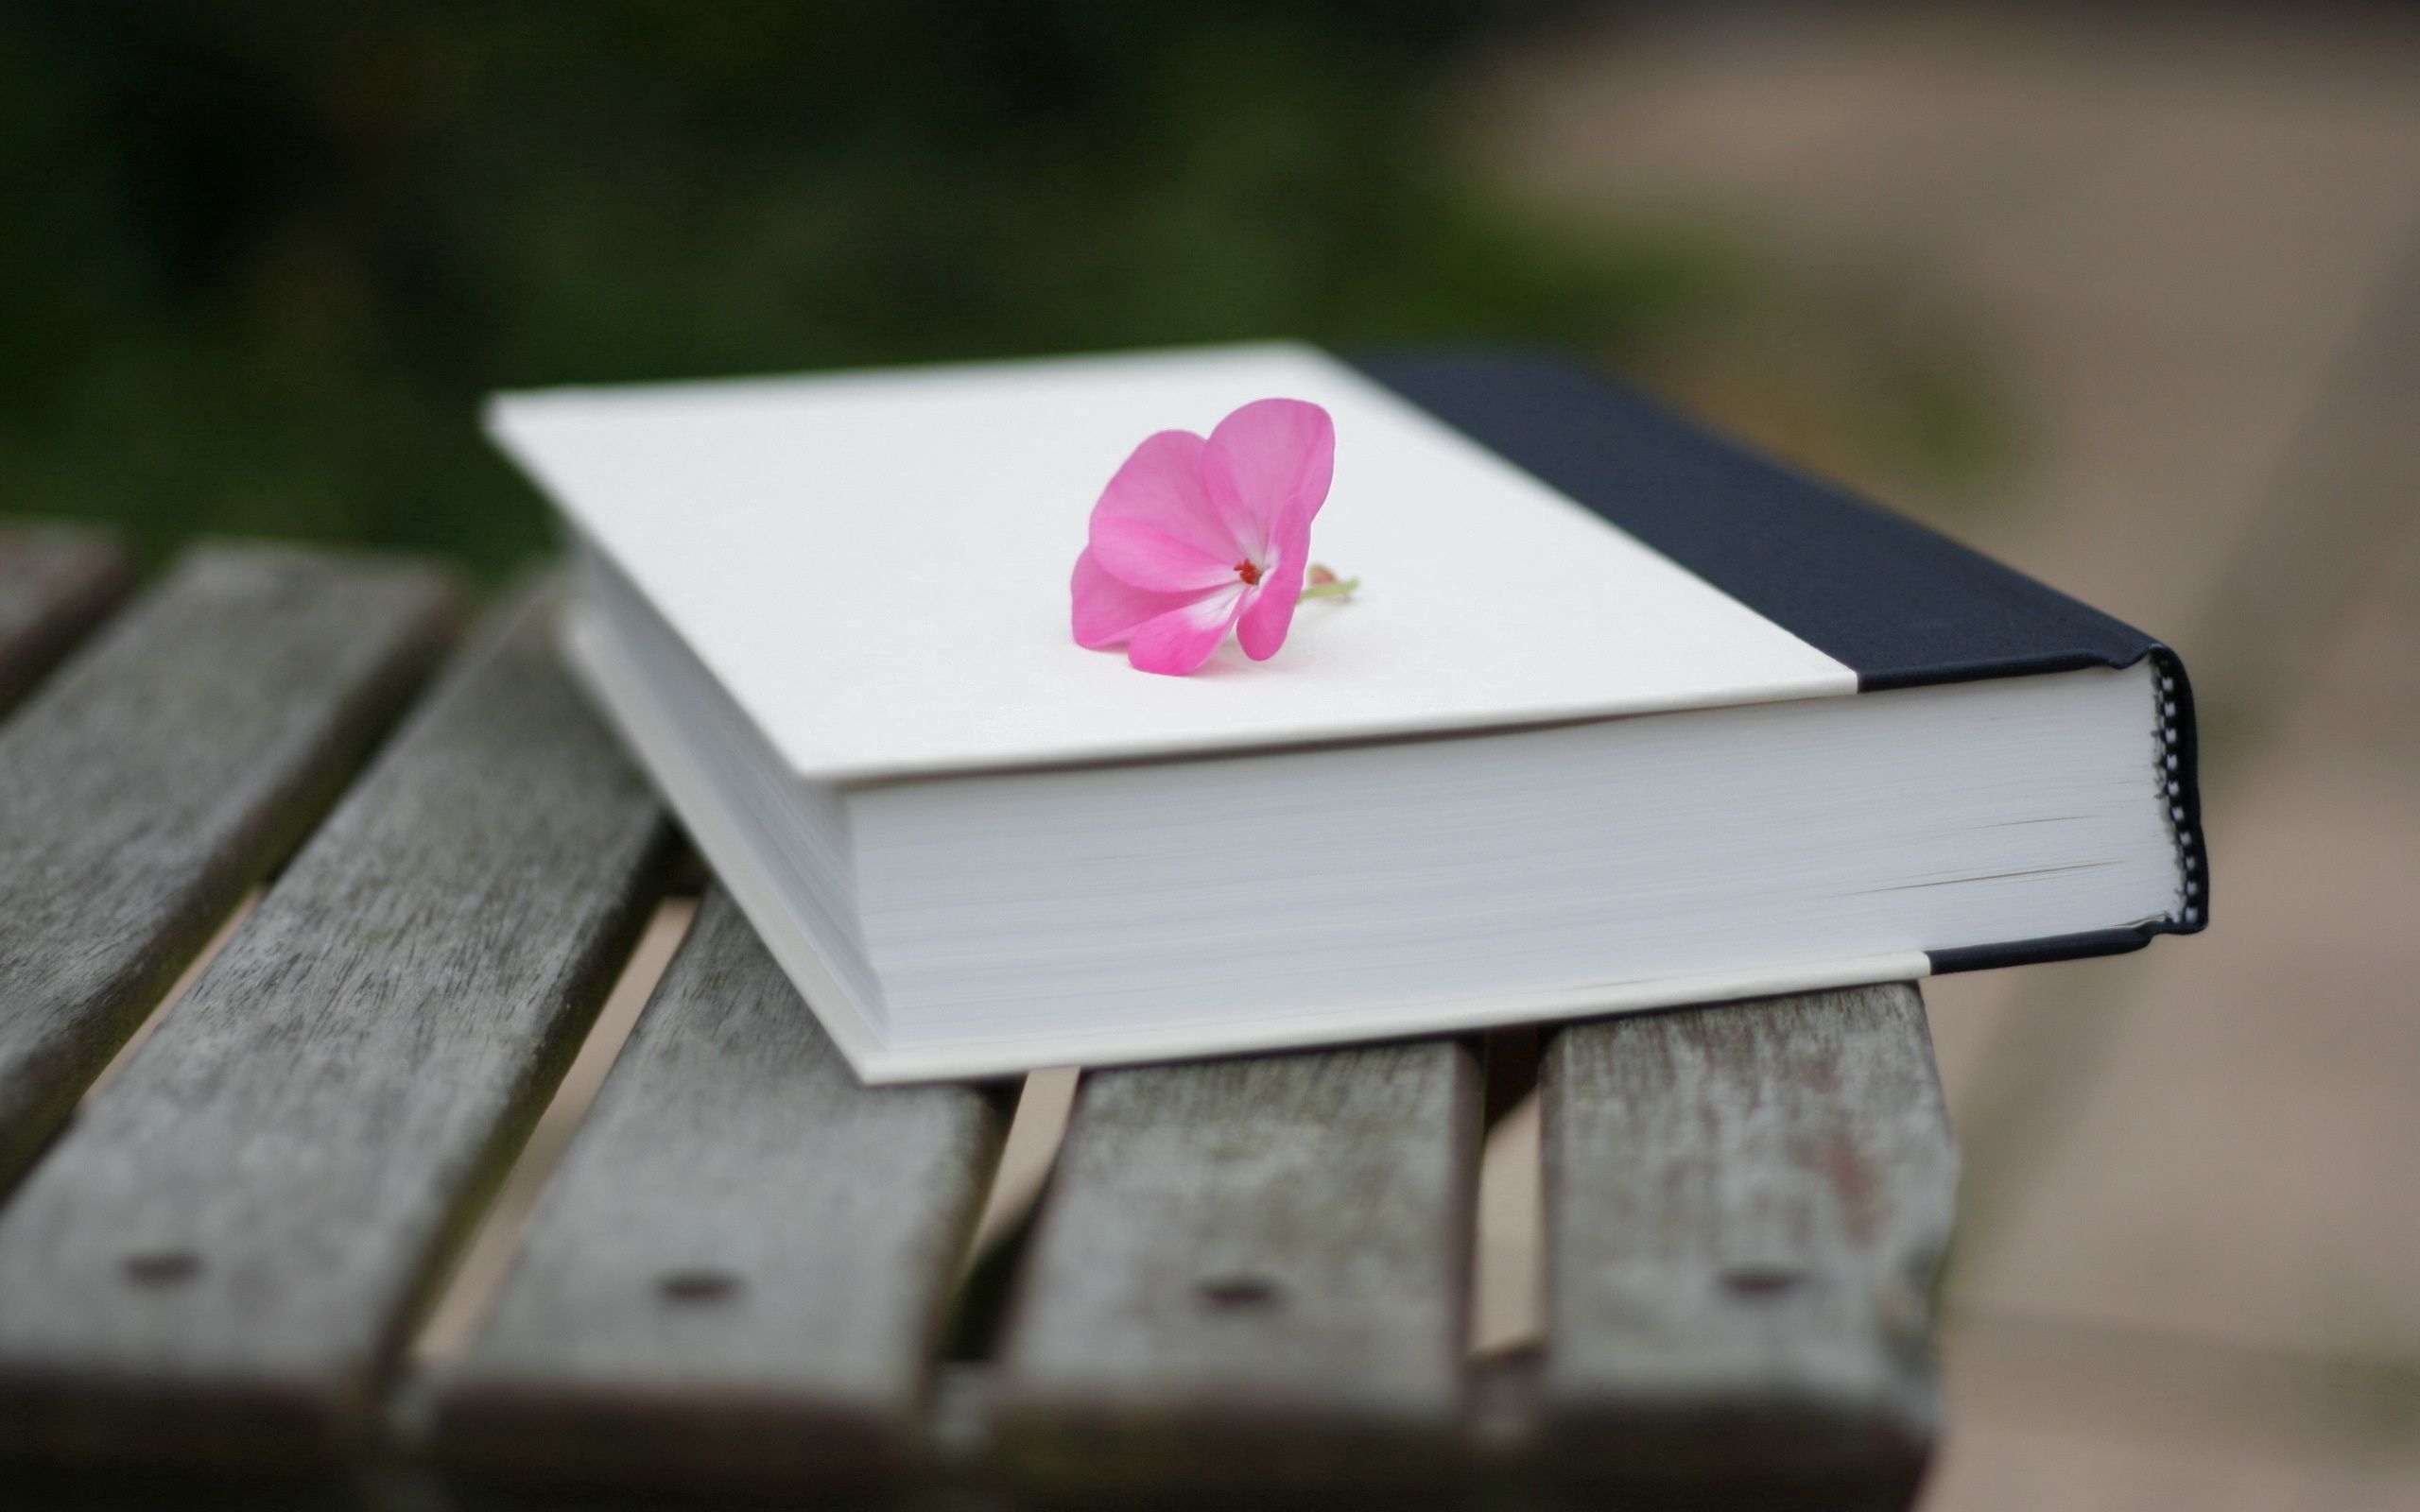 Download background smooth, flower, miscellanea, miscellaneous, blur, book, bench, handsomely, it's beautiful